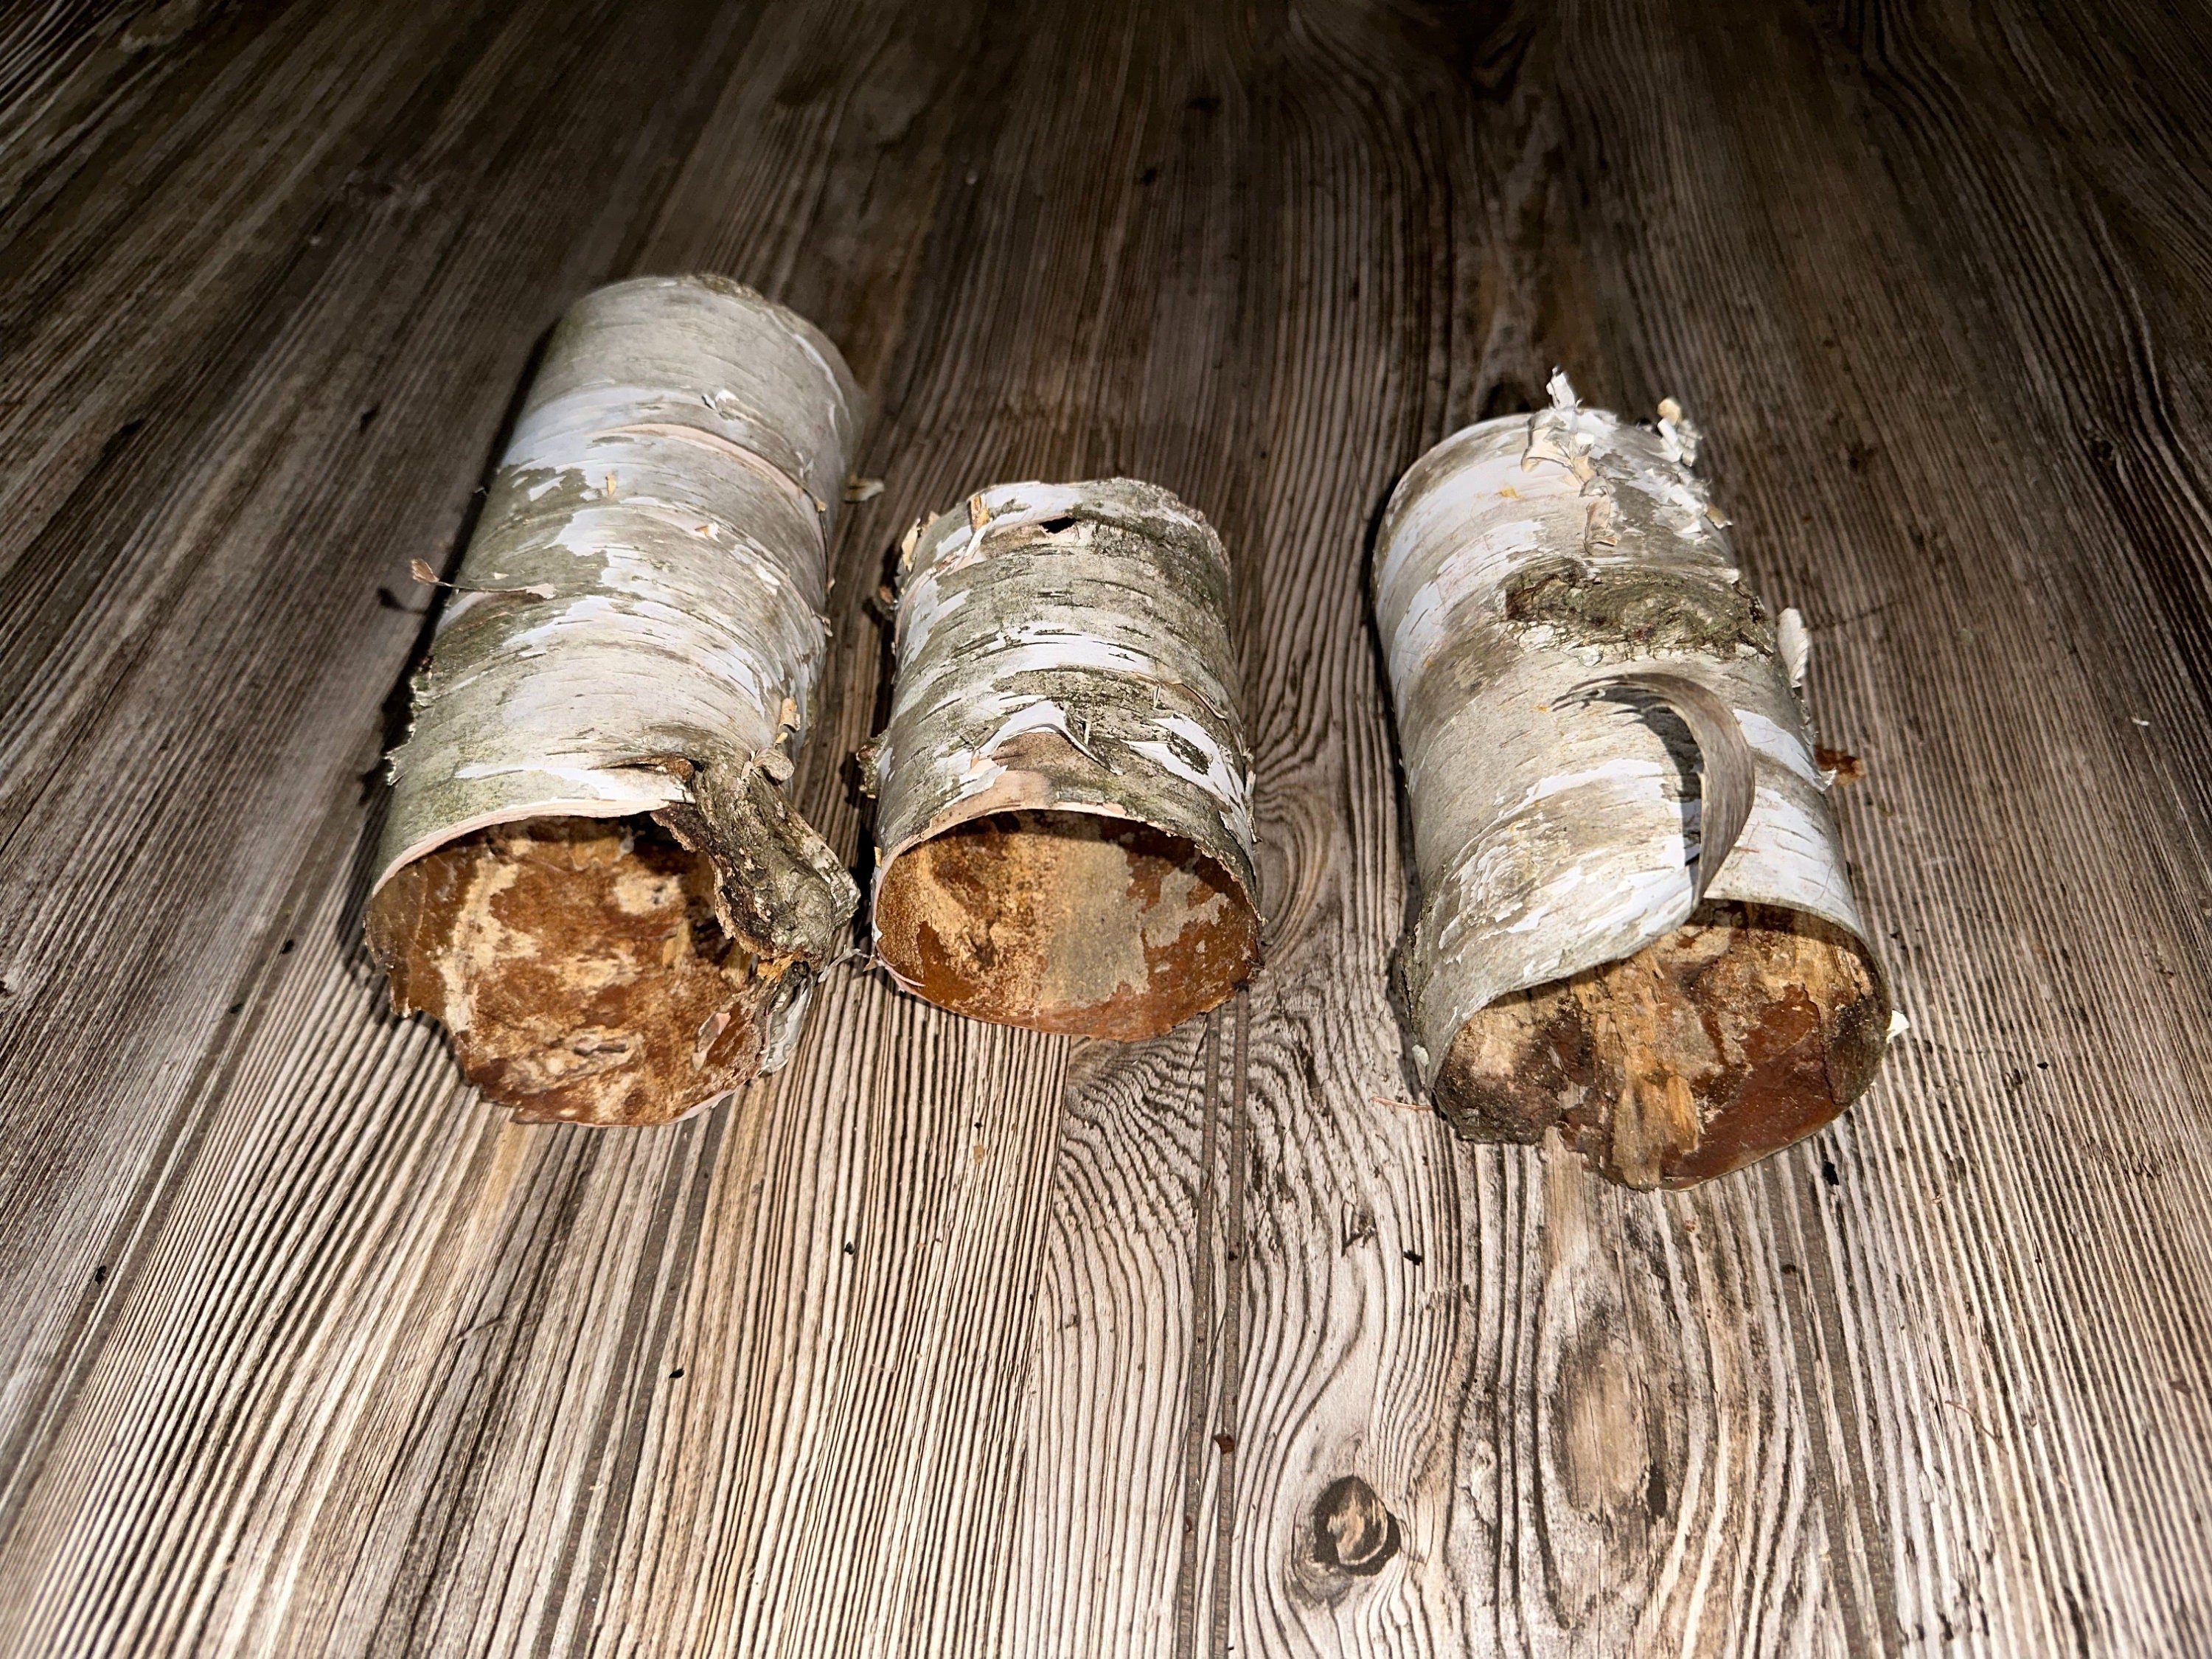 Three White Birch Bark Tubes, Approximately 4.5-7.5 Inches Long by 3 Inches Wide and 3 Inches High